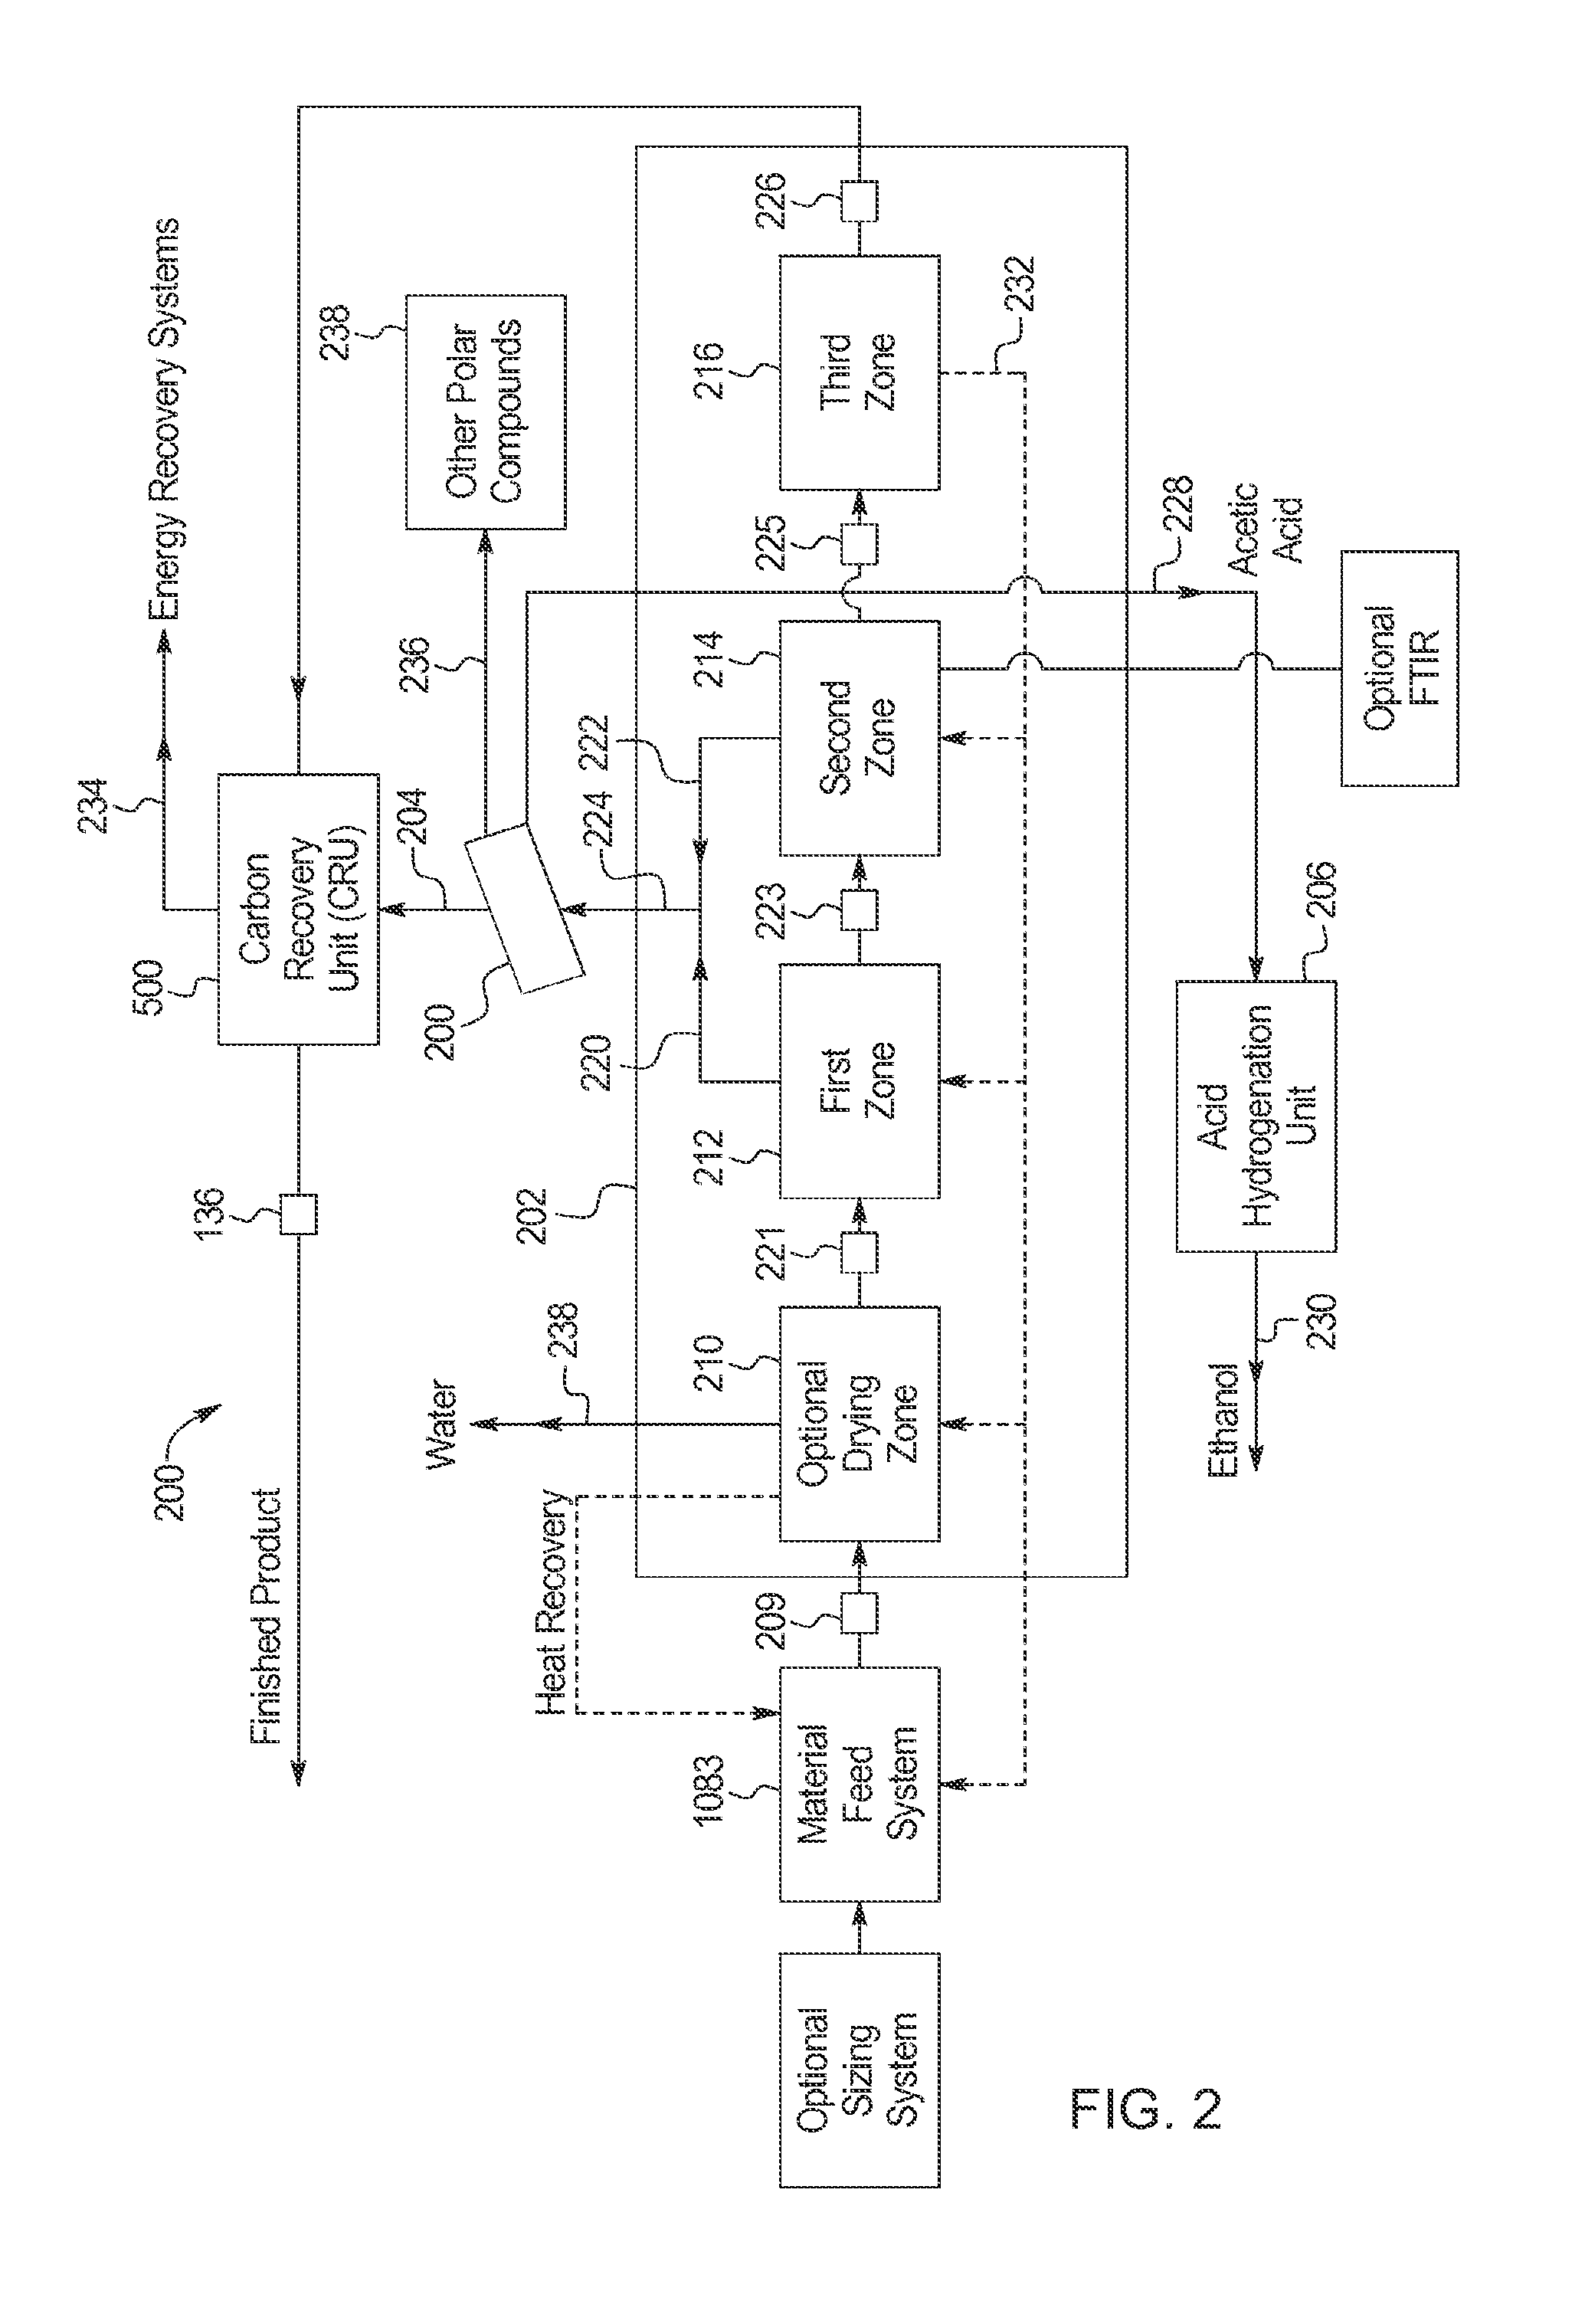 Process for producing high-carbon biogenic reagents